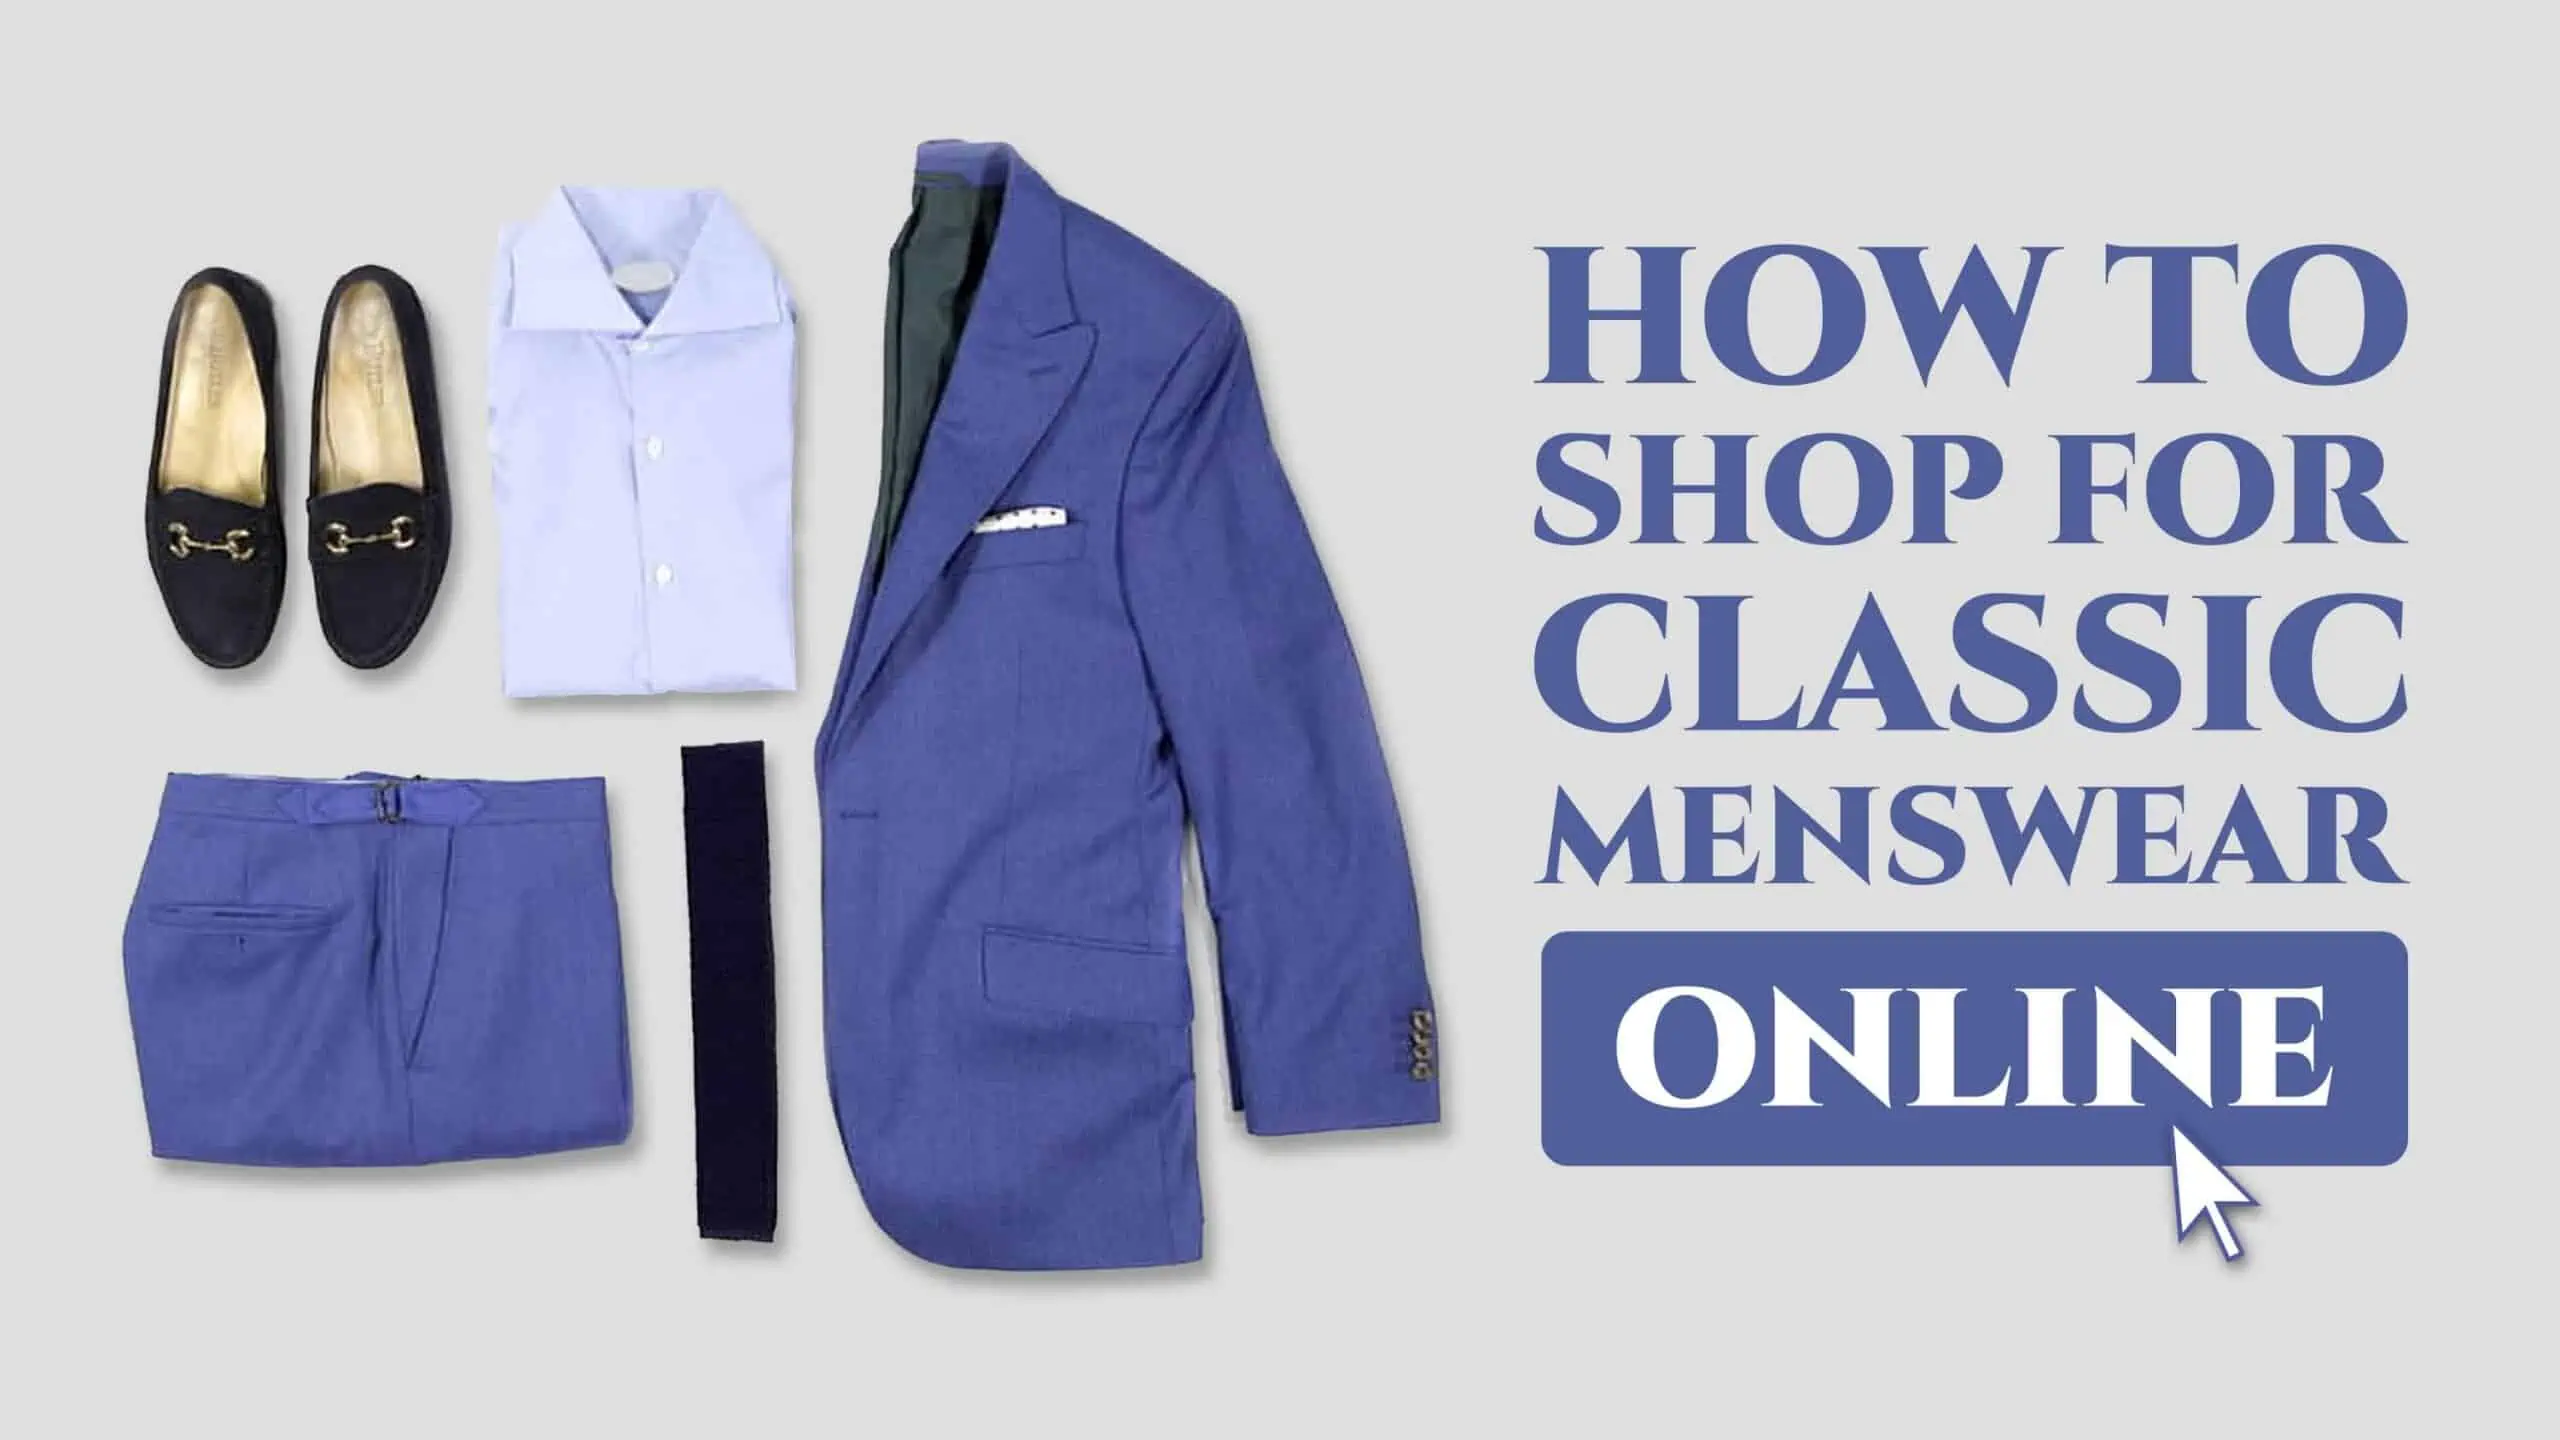 how to shop for classic menswear online 3840x2160 scaled